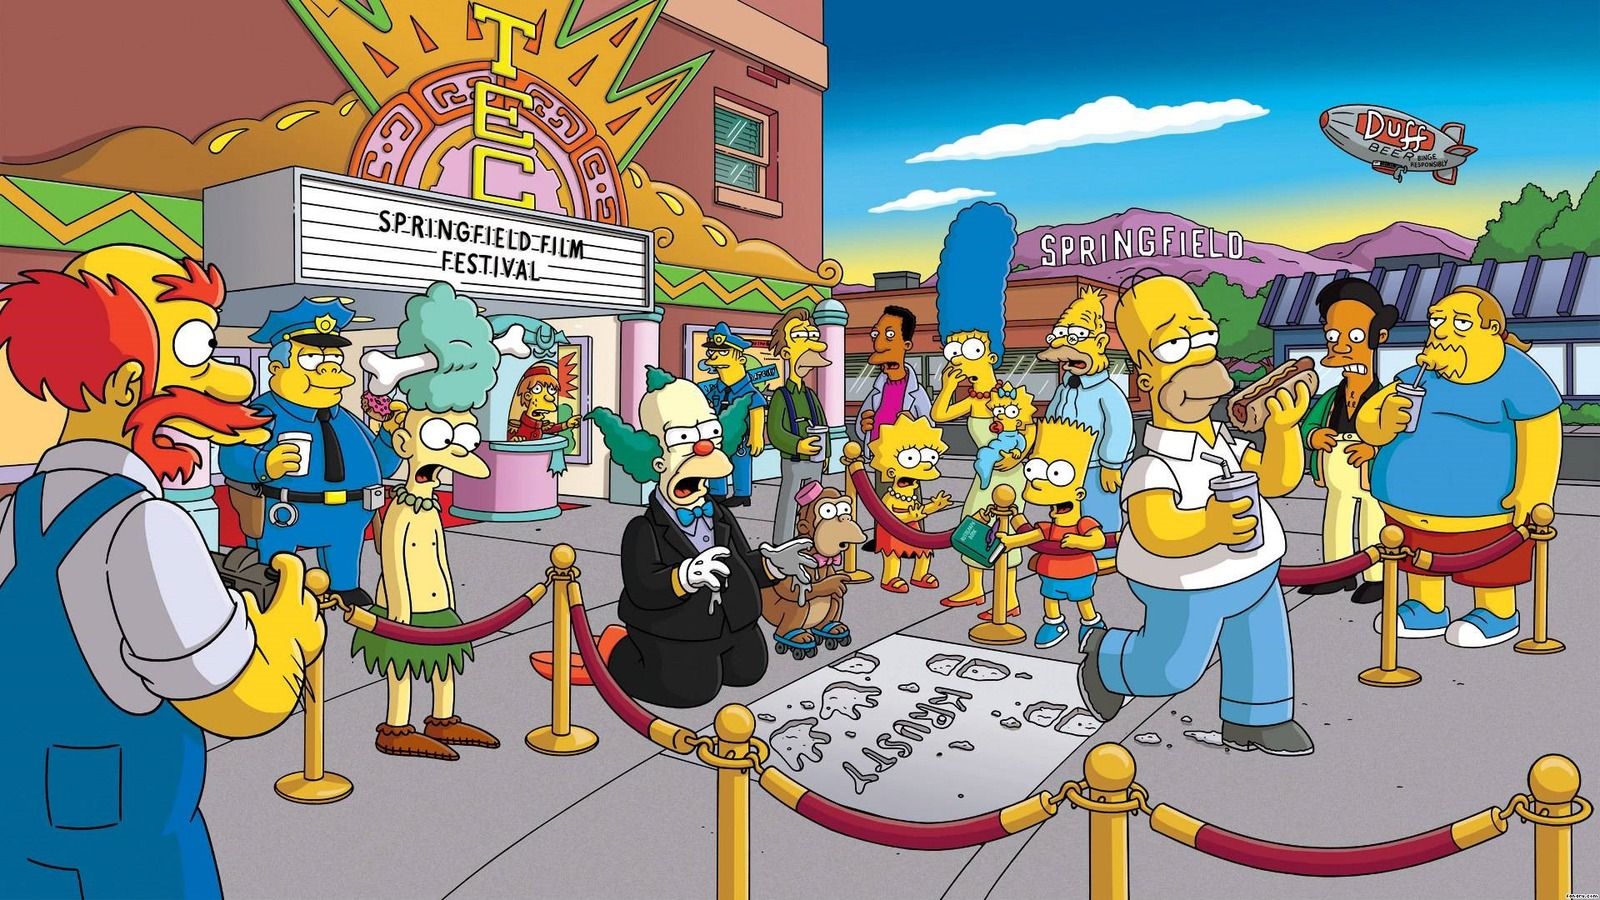 A Simpsons Fan Theory Explains Why Springfield Can't Be Found on a Map